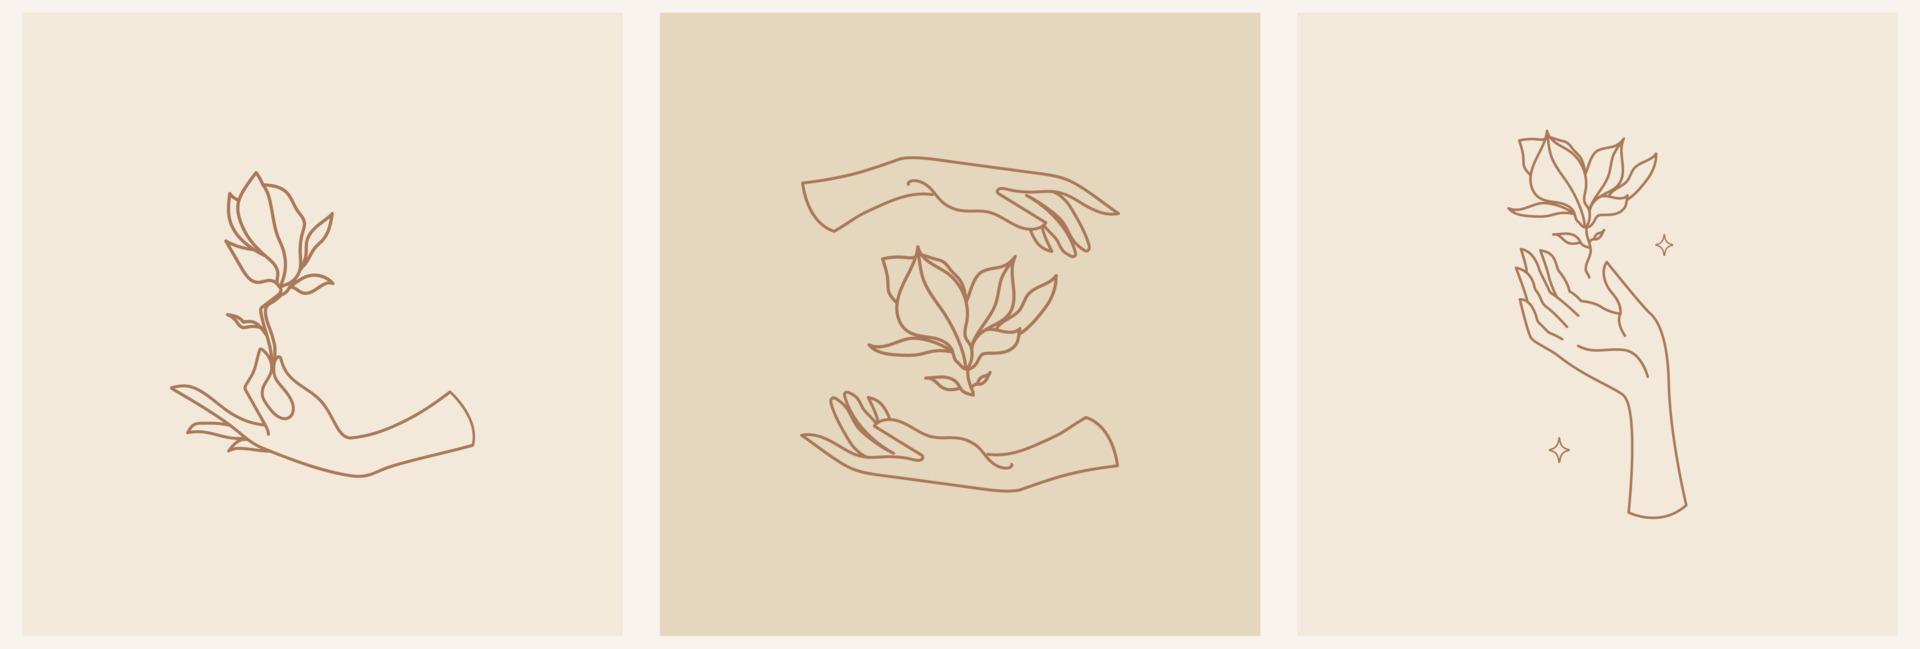 Women's symbols for trendy skin care cosmetics. Female hand with magnolia flower, template logo vector illustration in line art style.